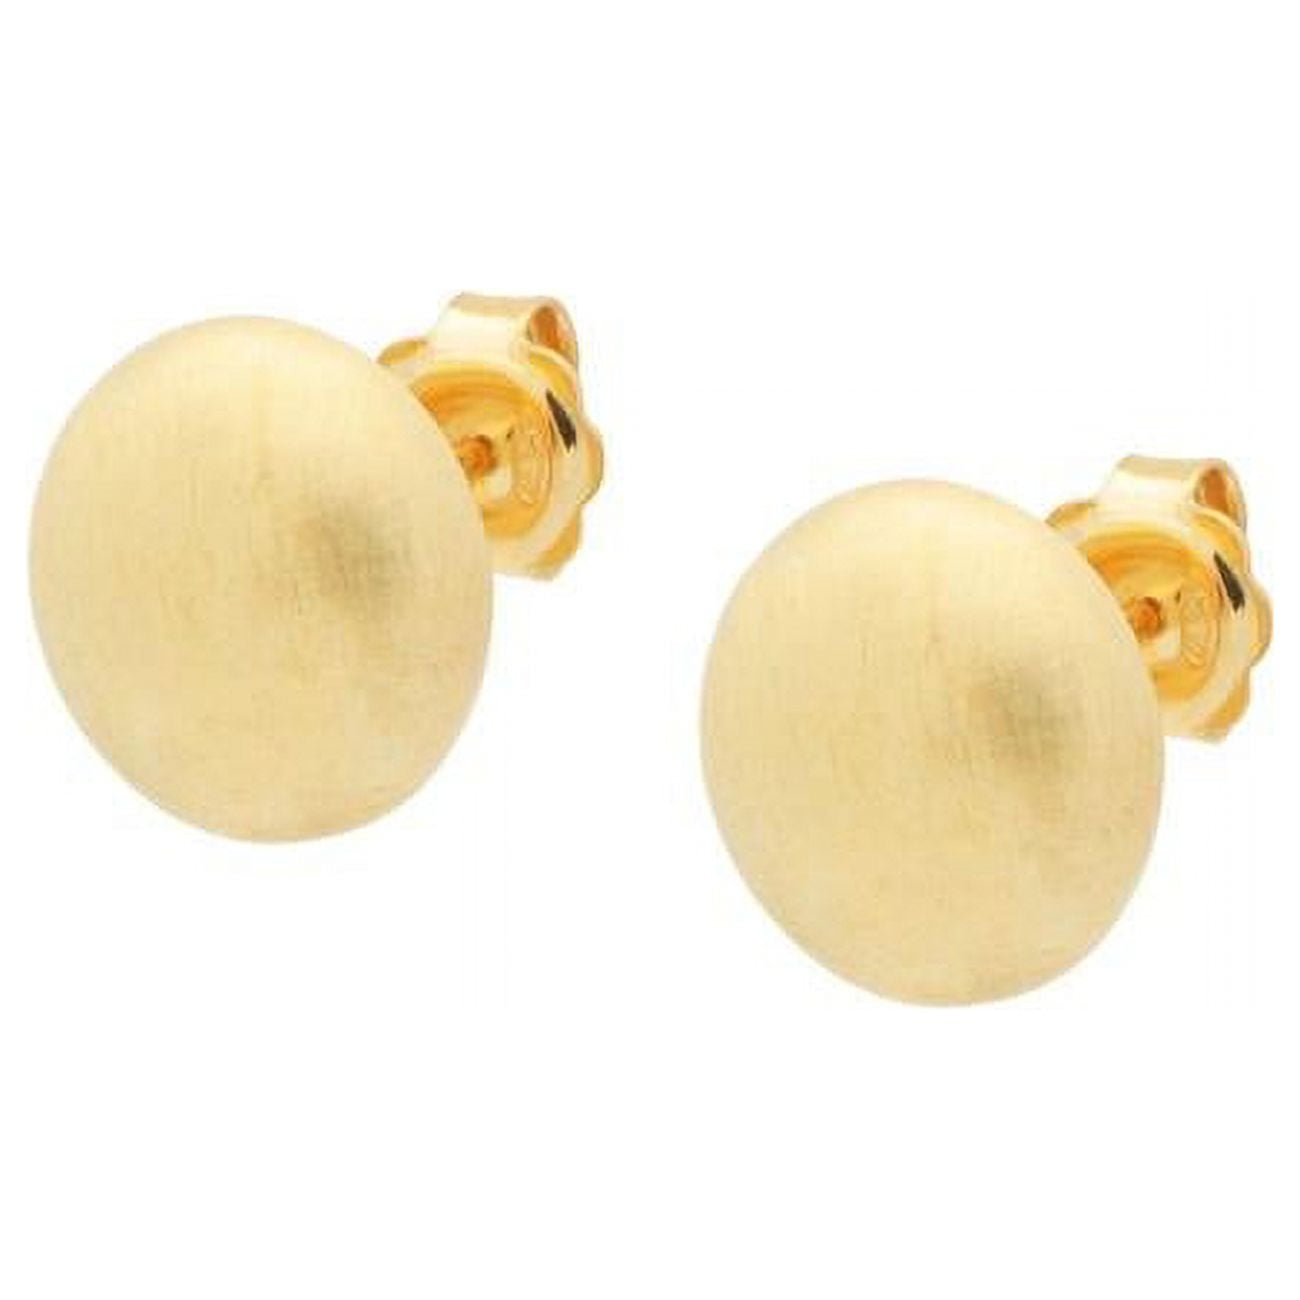 12s137g 13 Mm Sterling Silver Gold Plated Flat Ball Stud Earrings - Satin